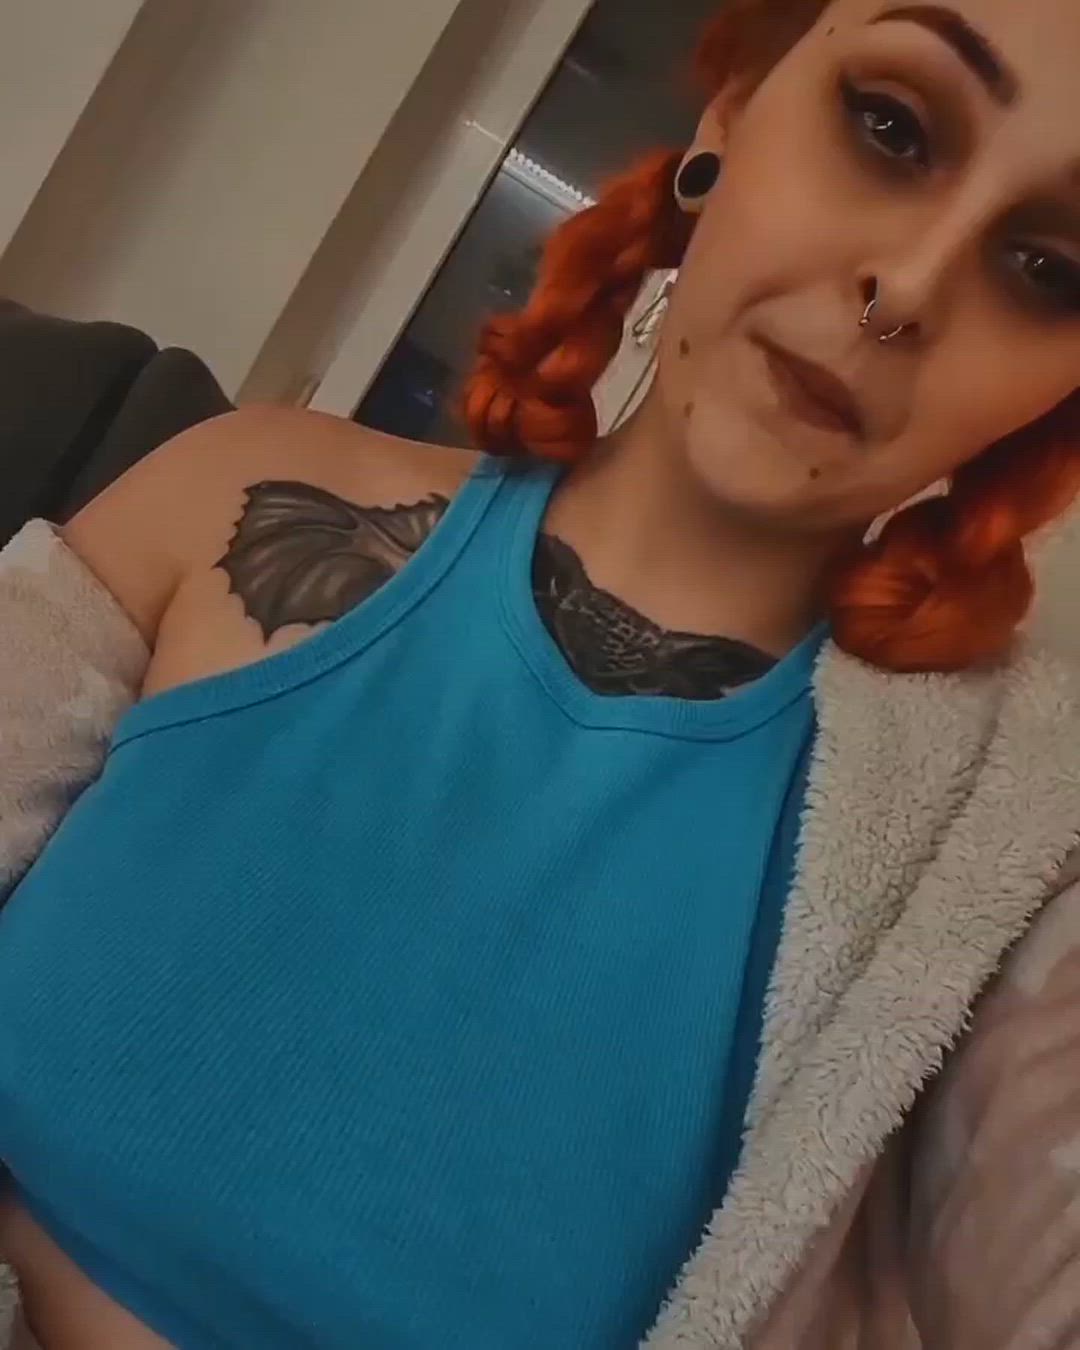 Amateur porn video with onlyfans model redhead-66 <strong>@r.e.d.h.e.a.d_66</strong>